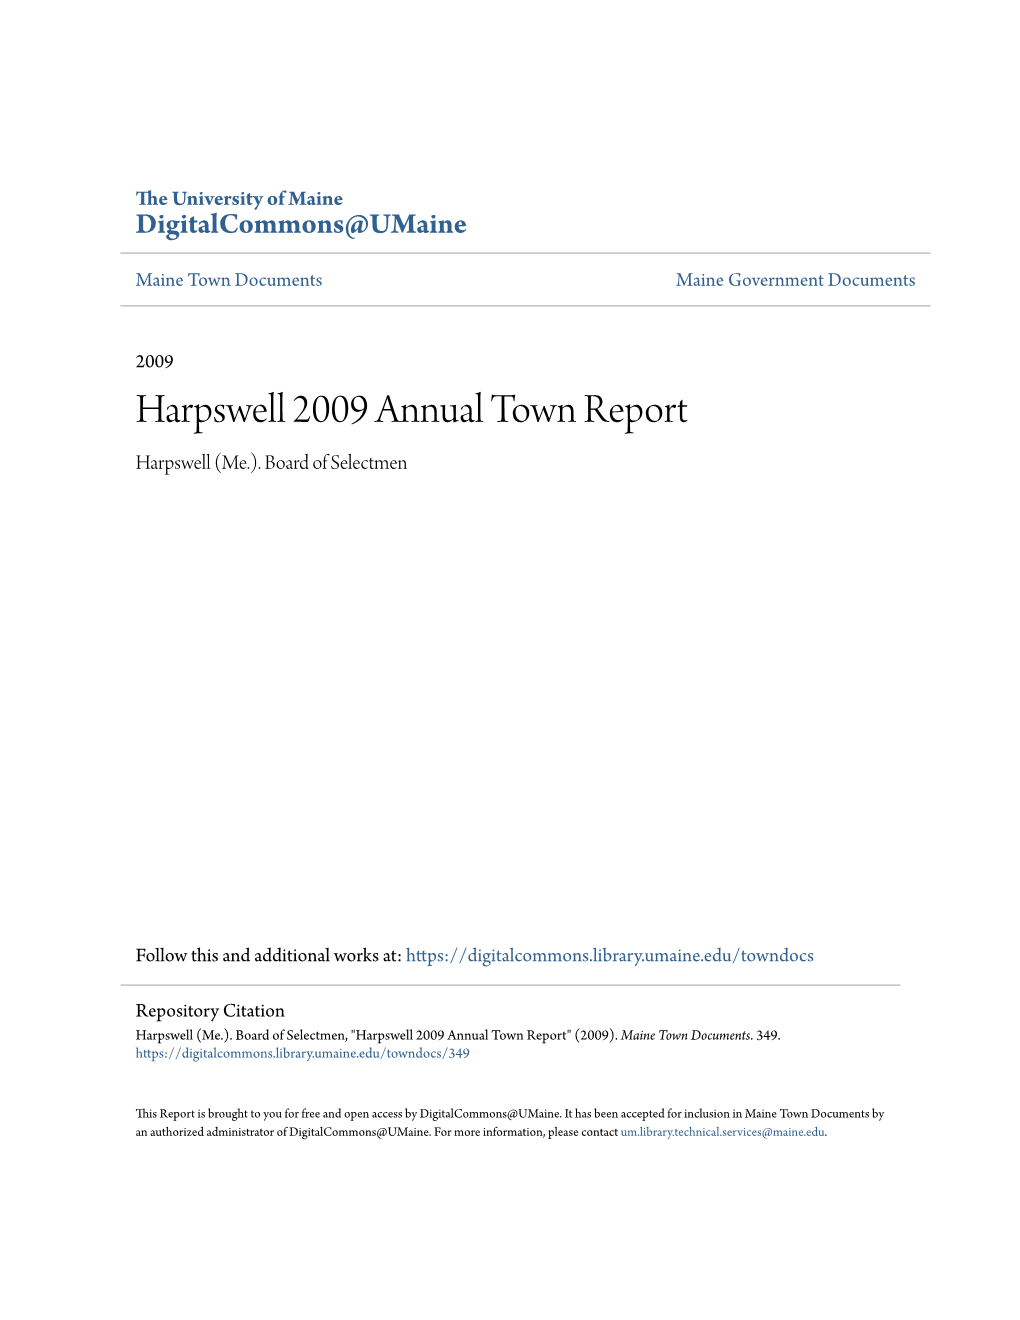 Harpswell 2009 Annual Town Report Harpswell (Me.)